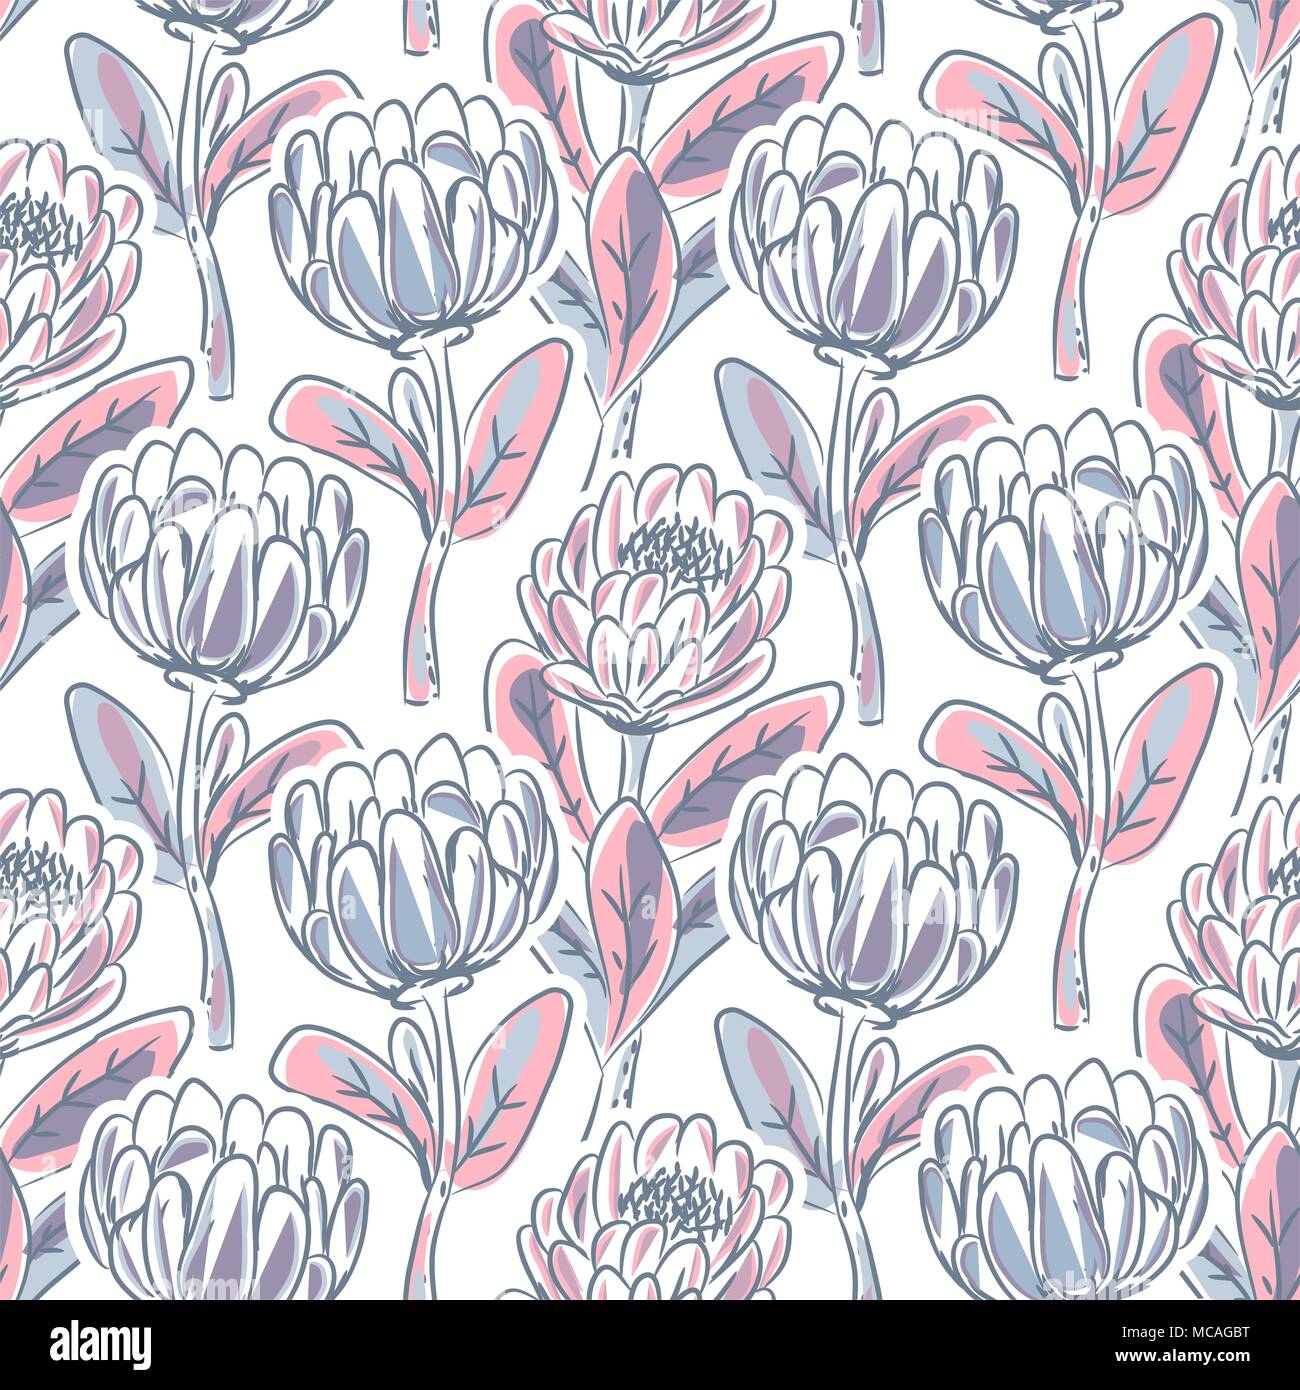 Hand drawn protea flower seamless vector pattern. Stock Vector